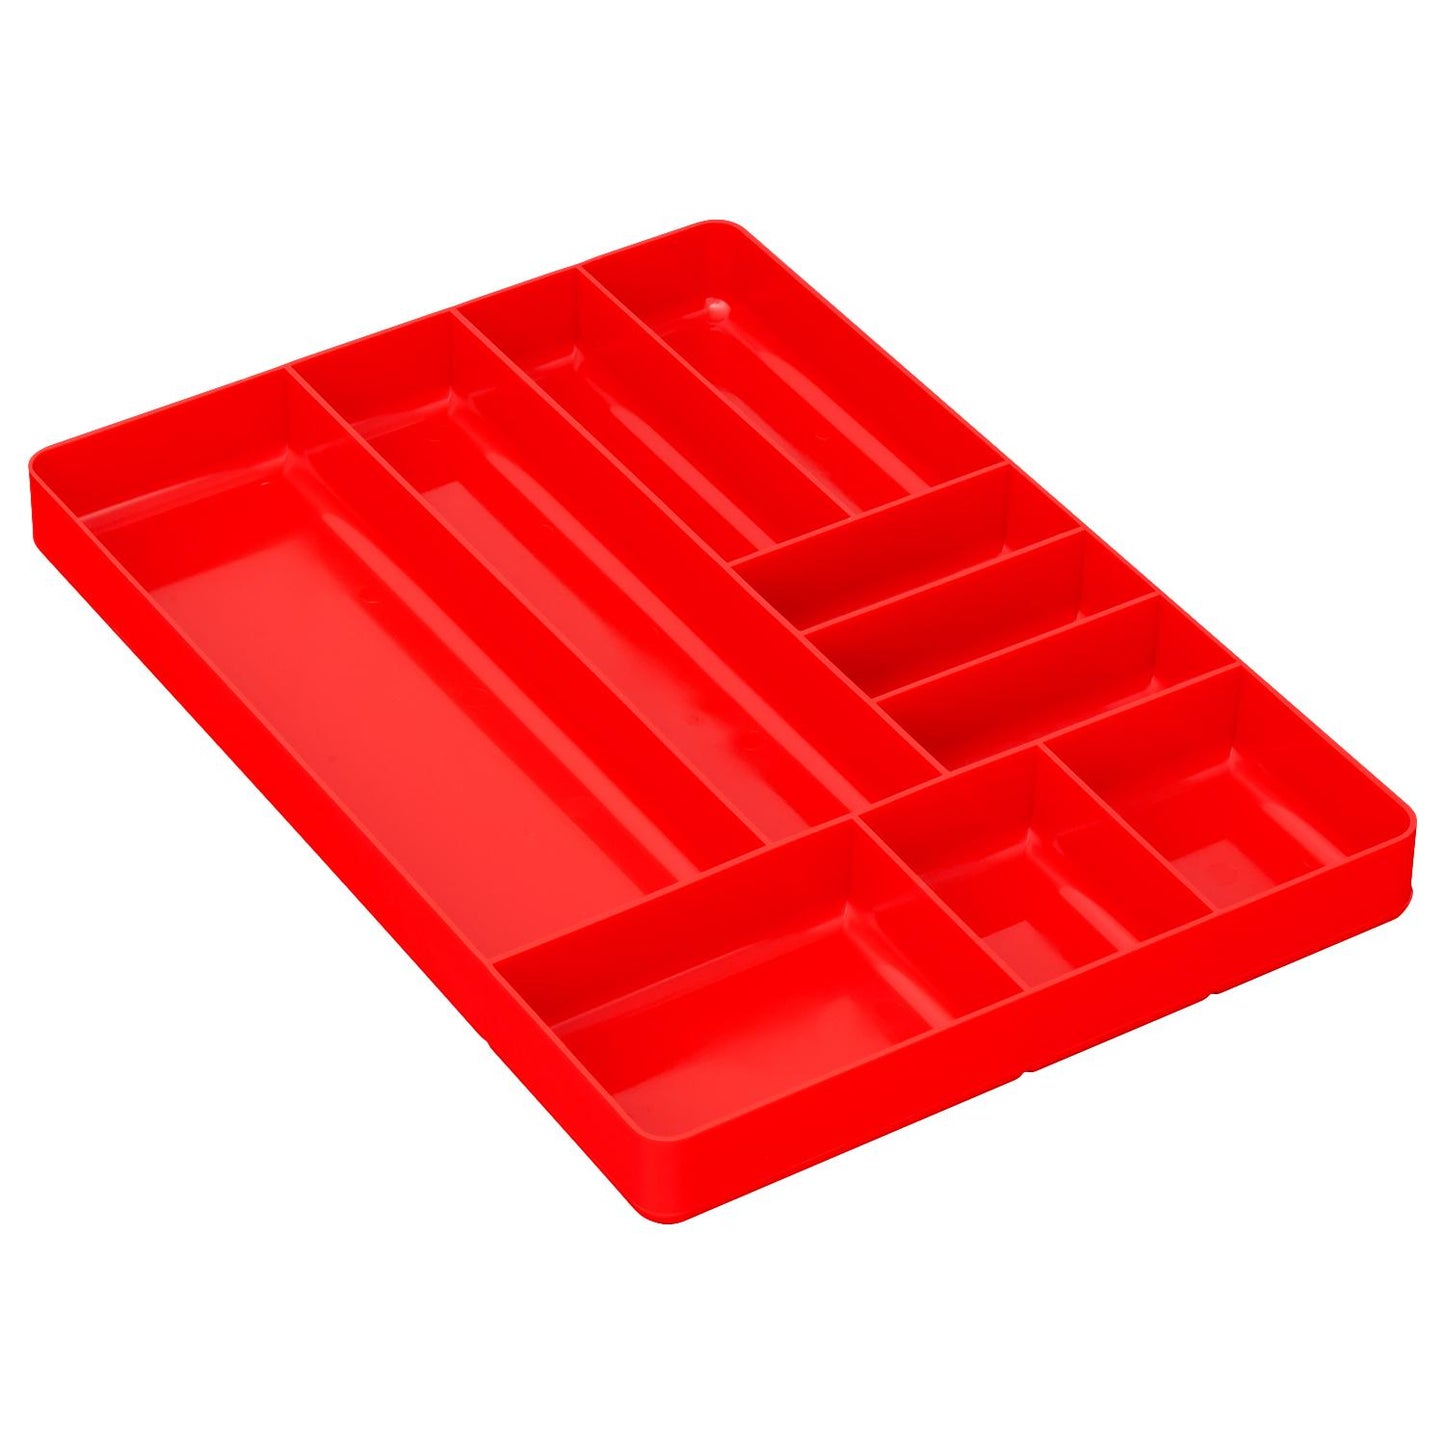 Ernst Tool Organiser Tray Red 10 Compartments 5010